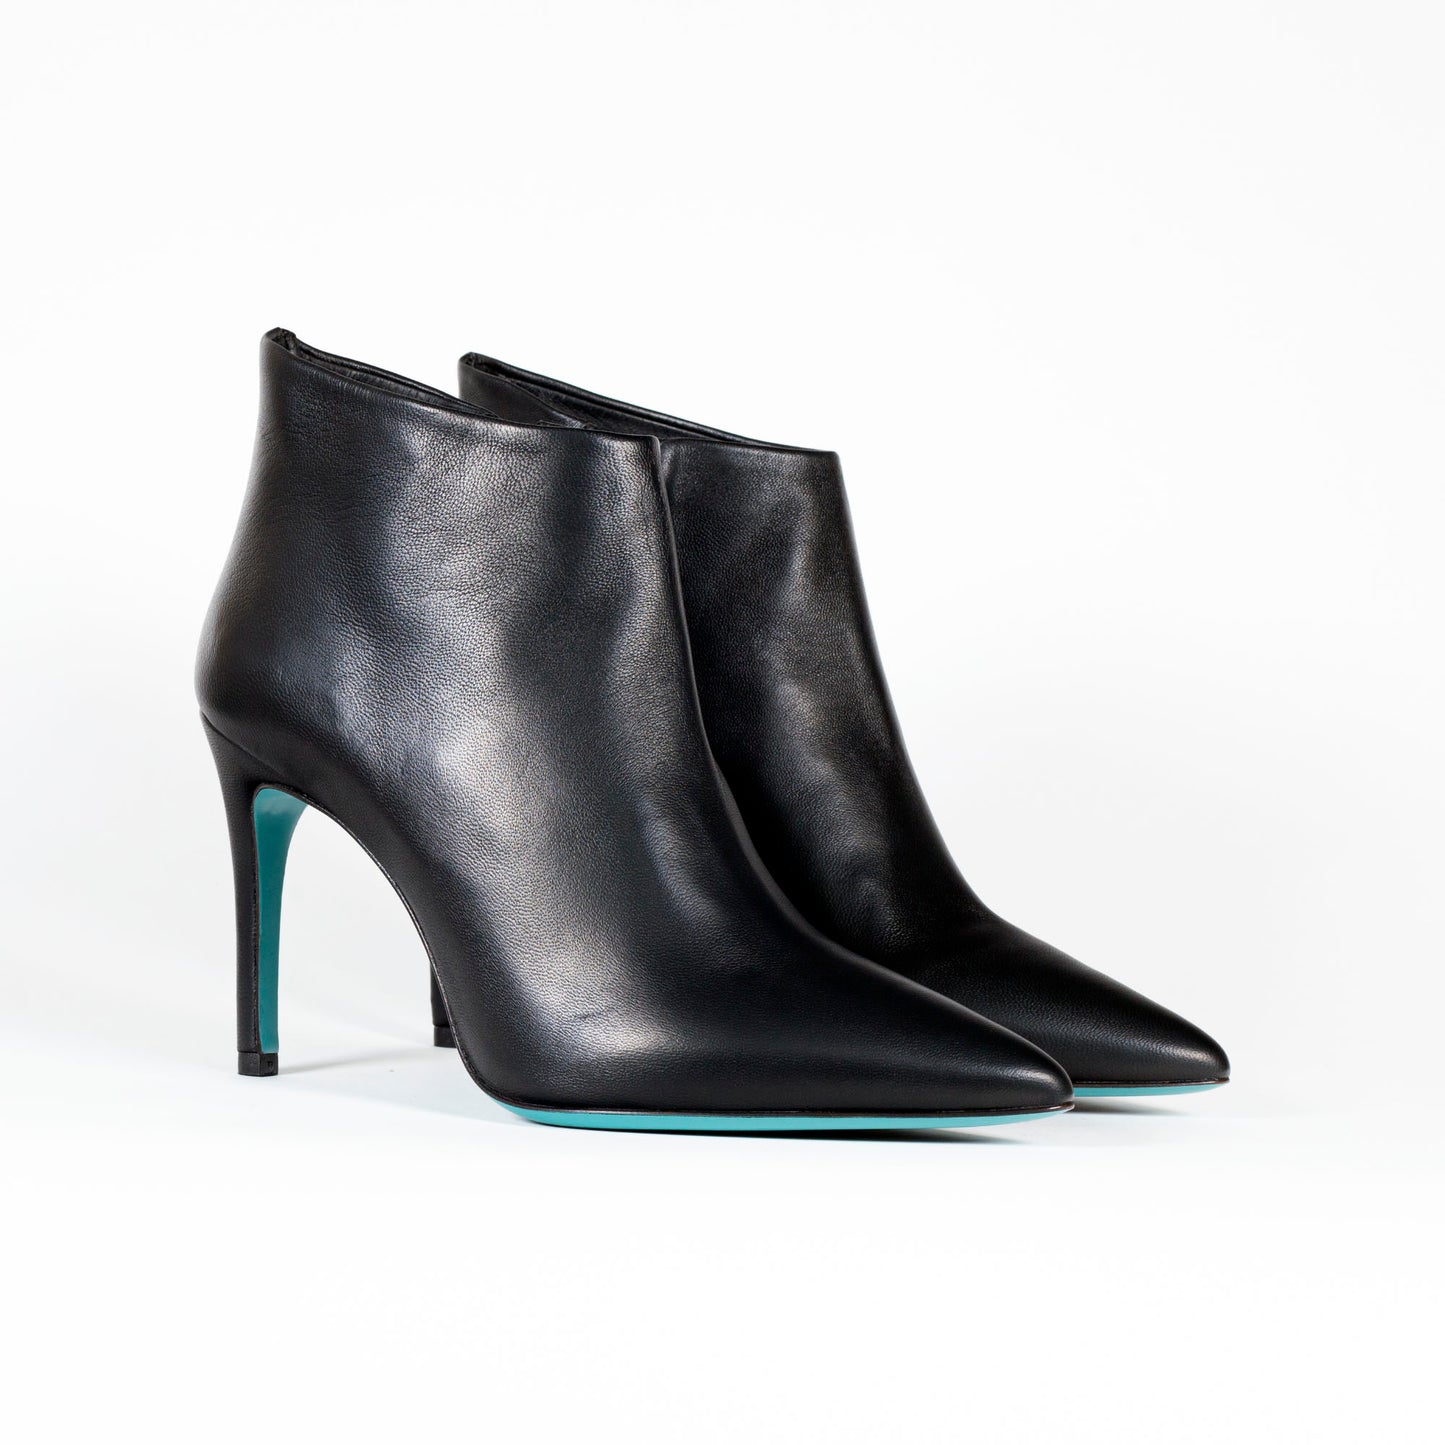 Russo - Ankle Boot